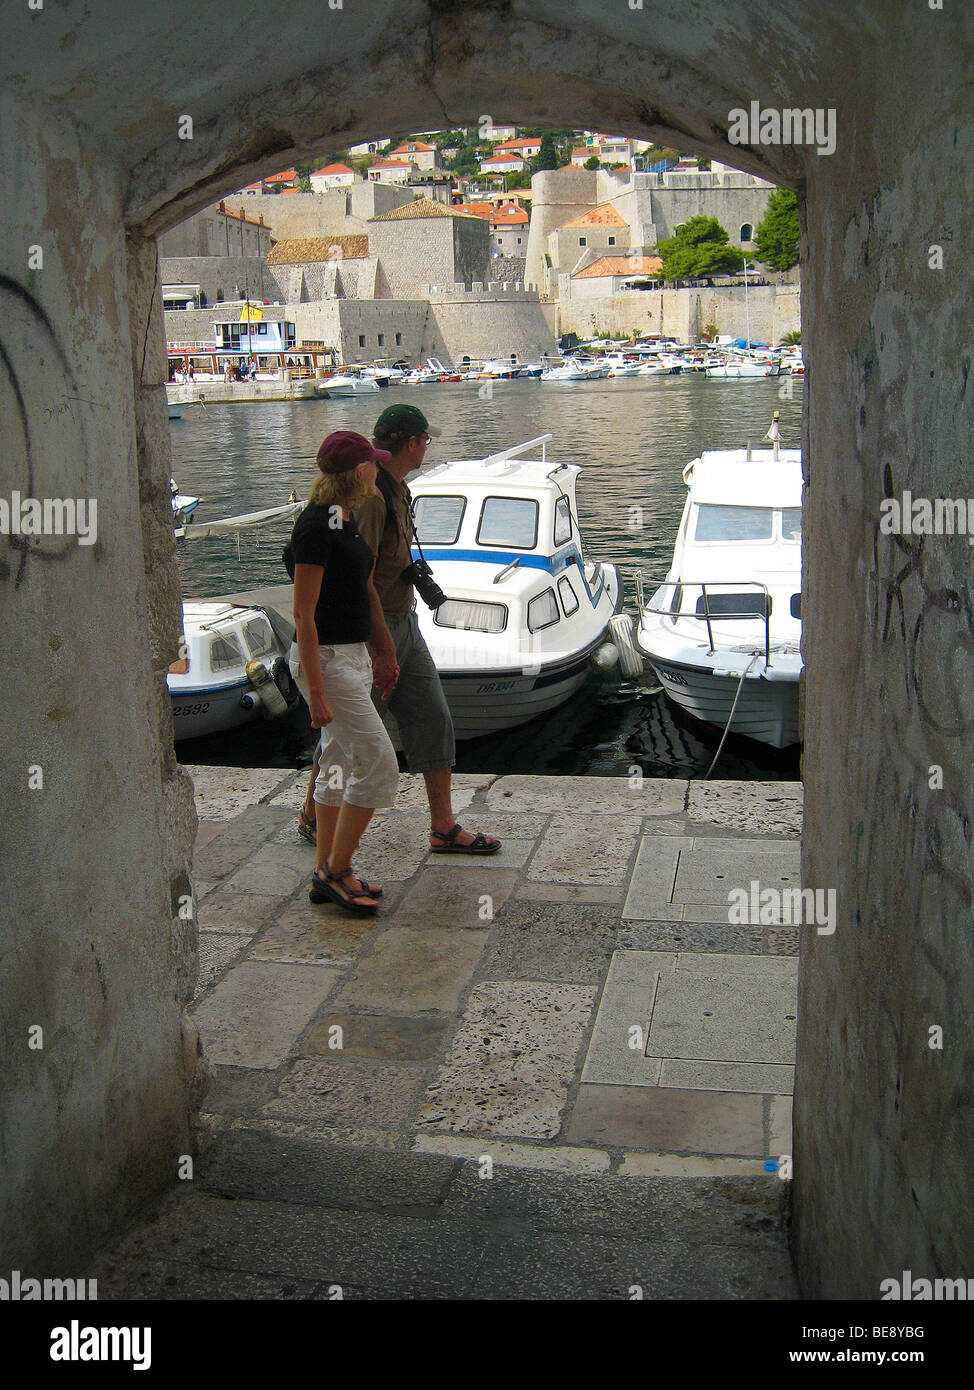 Croatia; Hrvartska; Kroatien; Dubrovnik, Fishboat and small tourist boat harbor, harbour, couple walks by arch in wall. Stock Photo